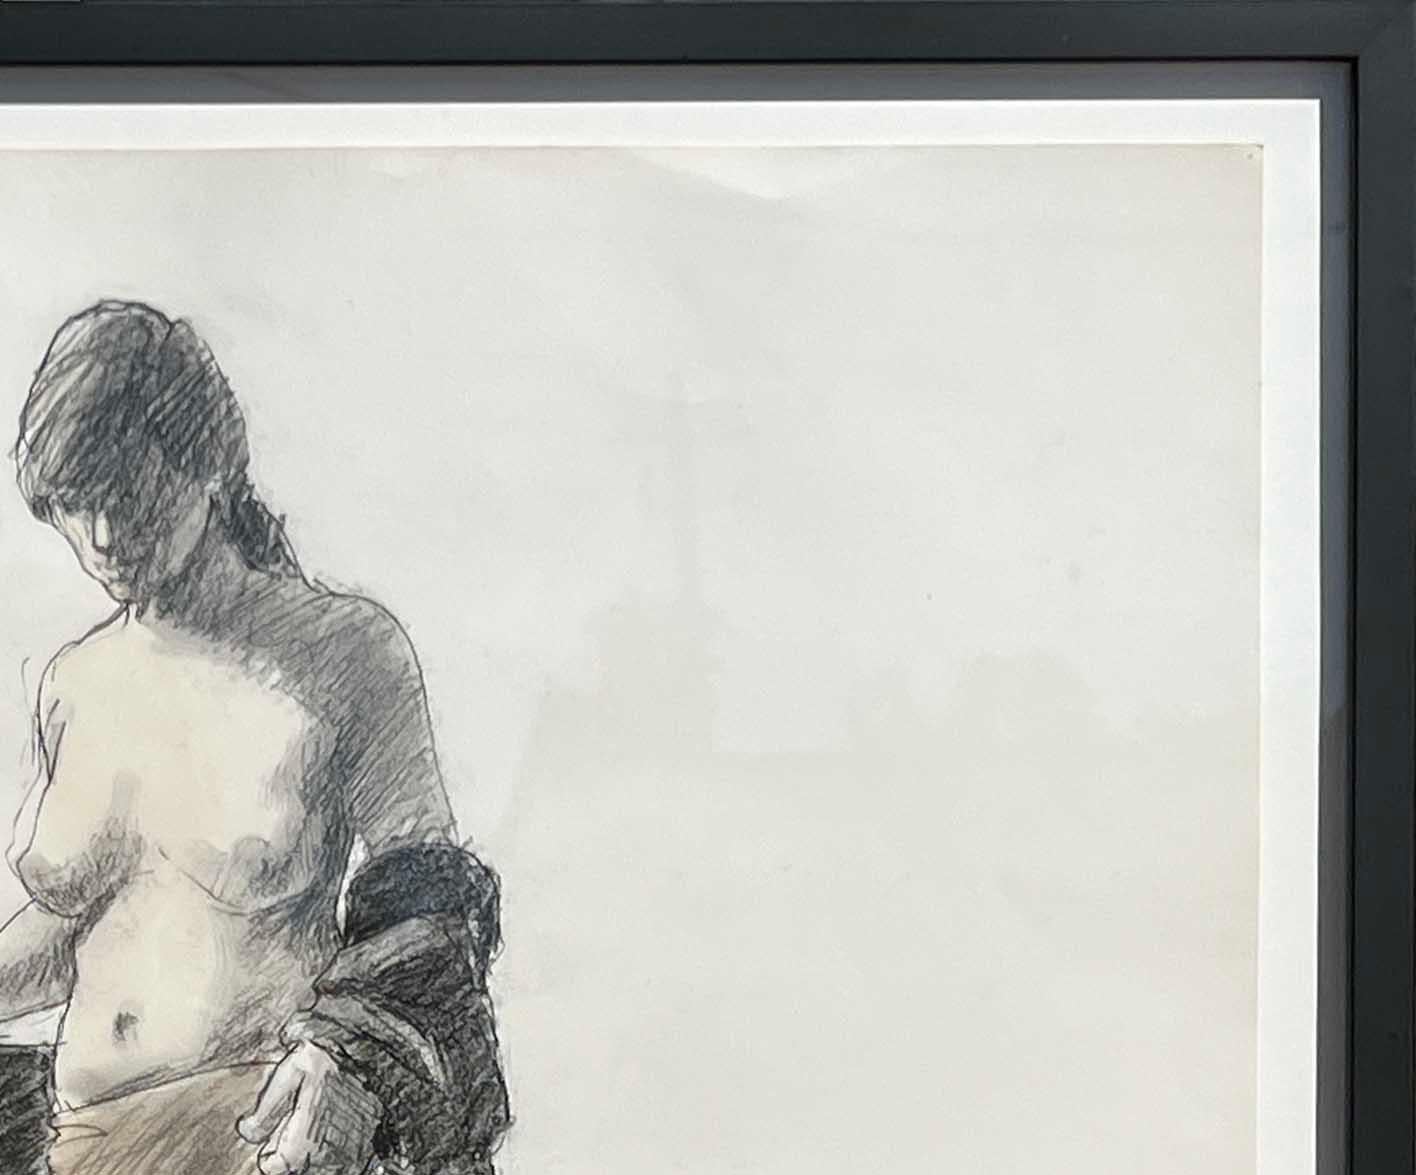 Black and white figurative drawing by Texas artist William Anzalone. The drawing depicts a nude woman in solitude taking off her robe. Signed by the artist at the bottom right. Framed in a beautiful black modern frame. 

Dimensions Without Frame: H